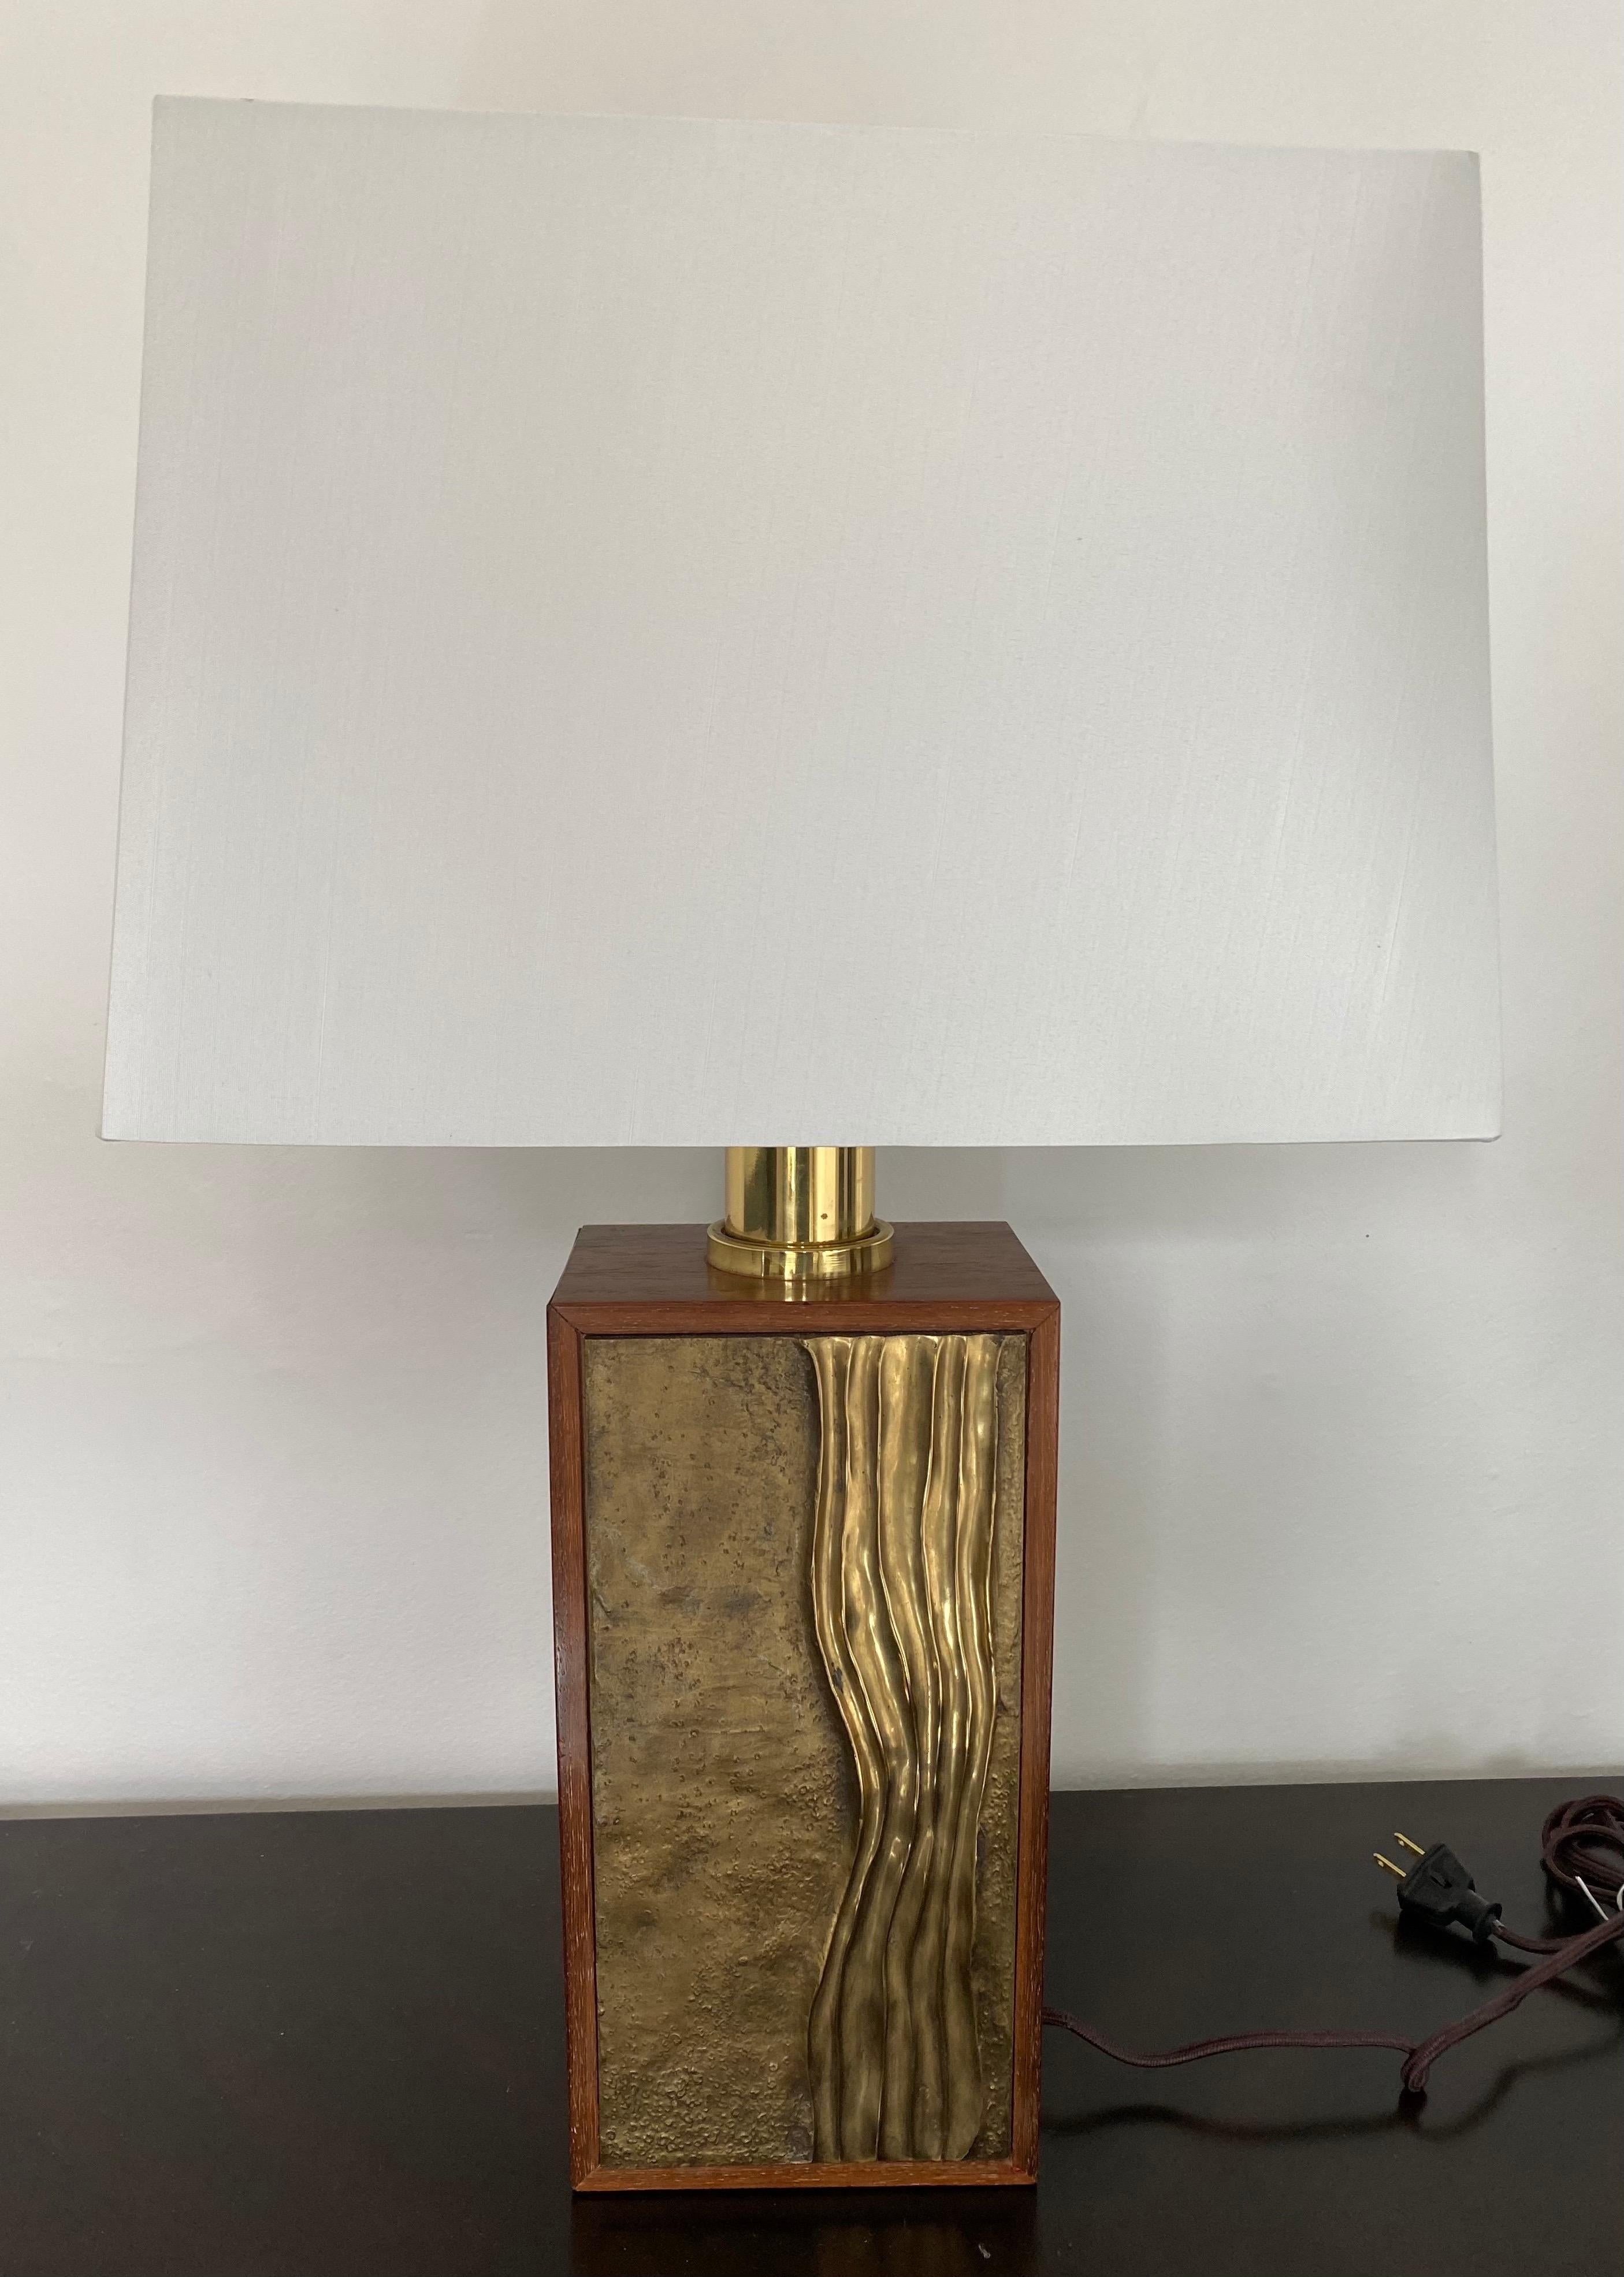 A handsome single table lamp in sculpted heavy bronze in a cerused oak vase and polished brass fittings. The bronze decoration is the same on both sides. Angelo Brotto for Esperia. Newly rewired.